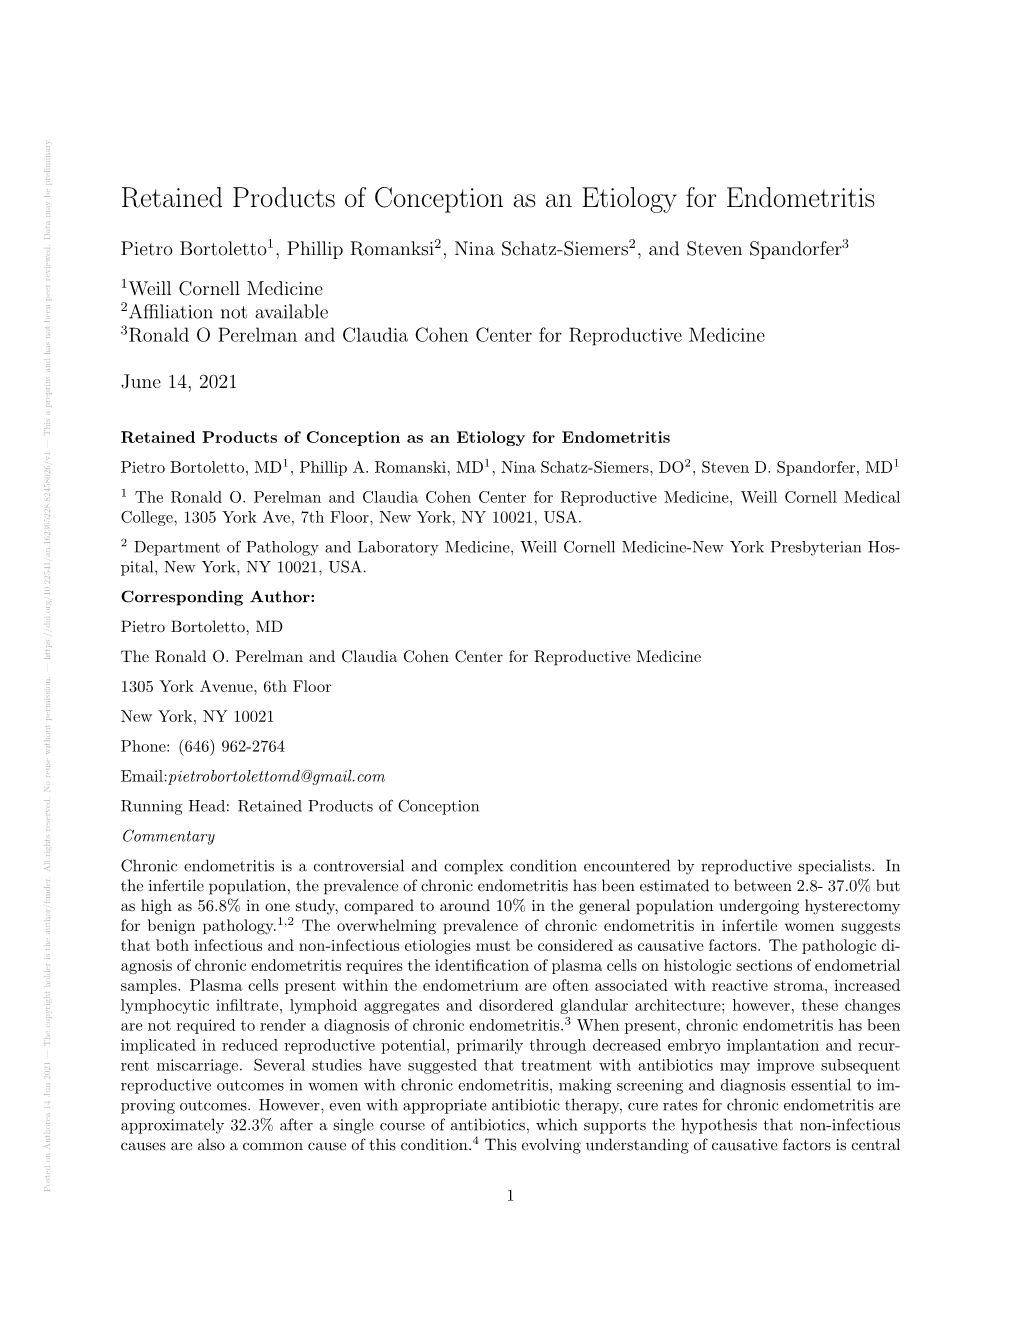 Retained Products of Conception As an Etiology for Endometritis